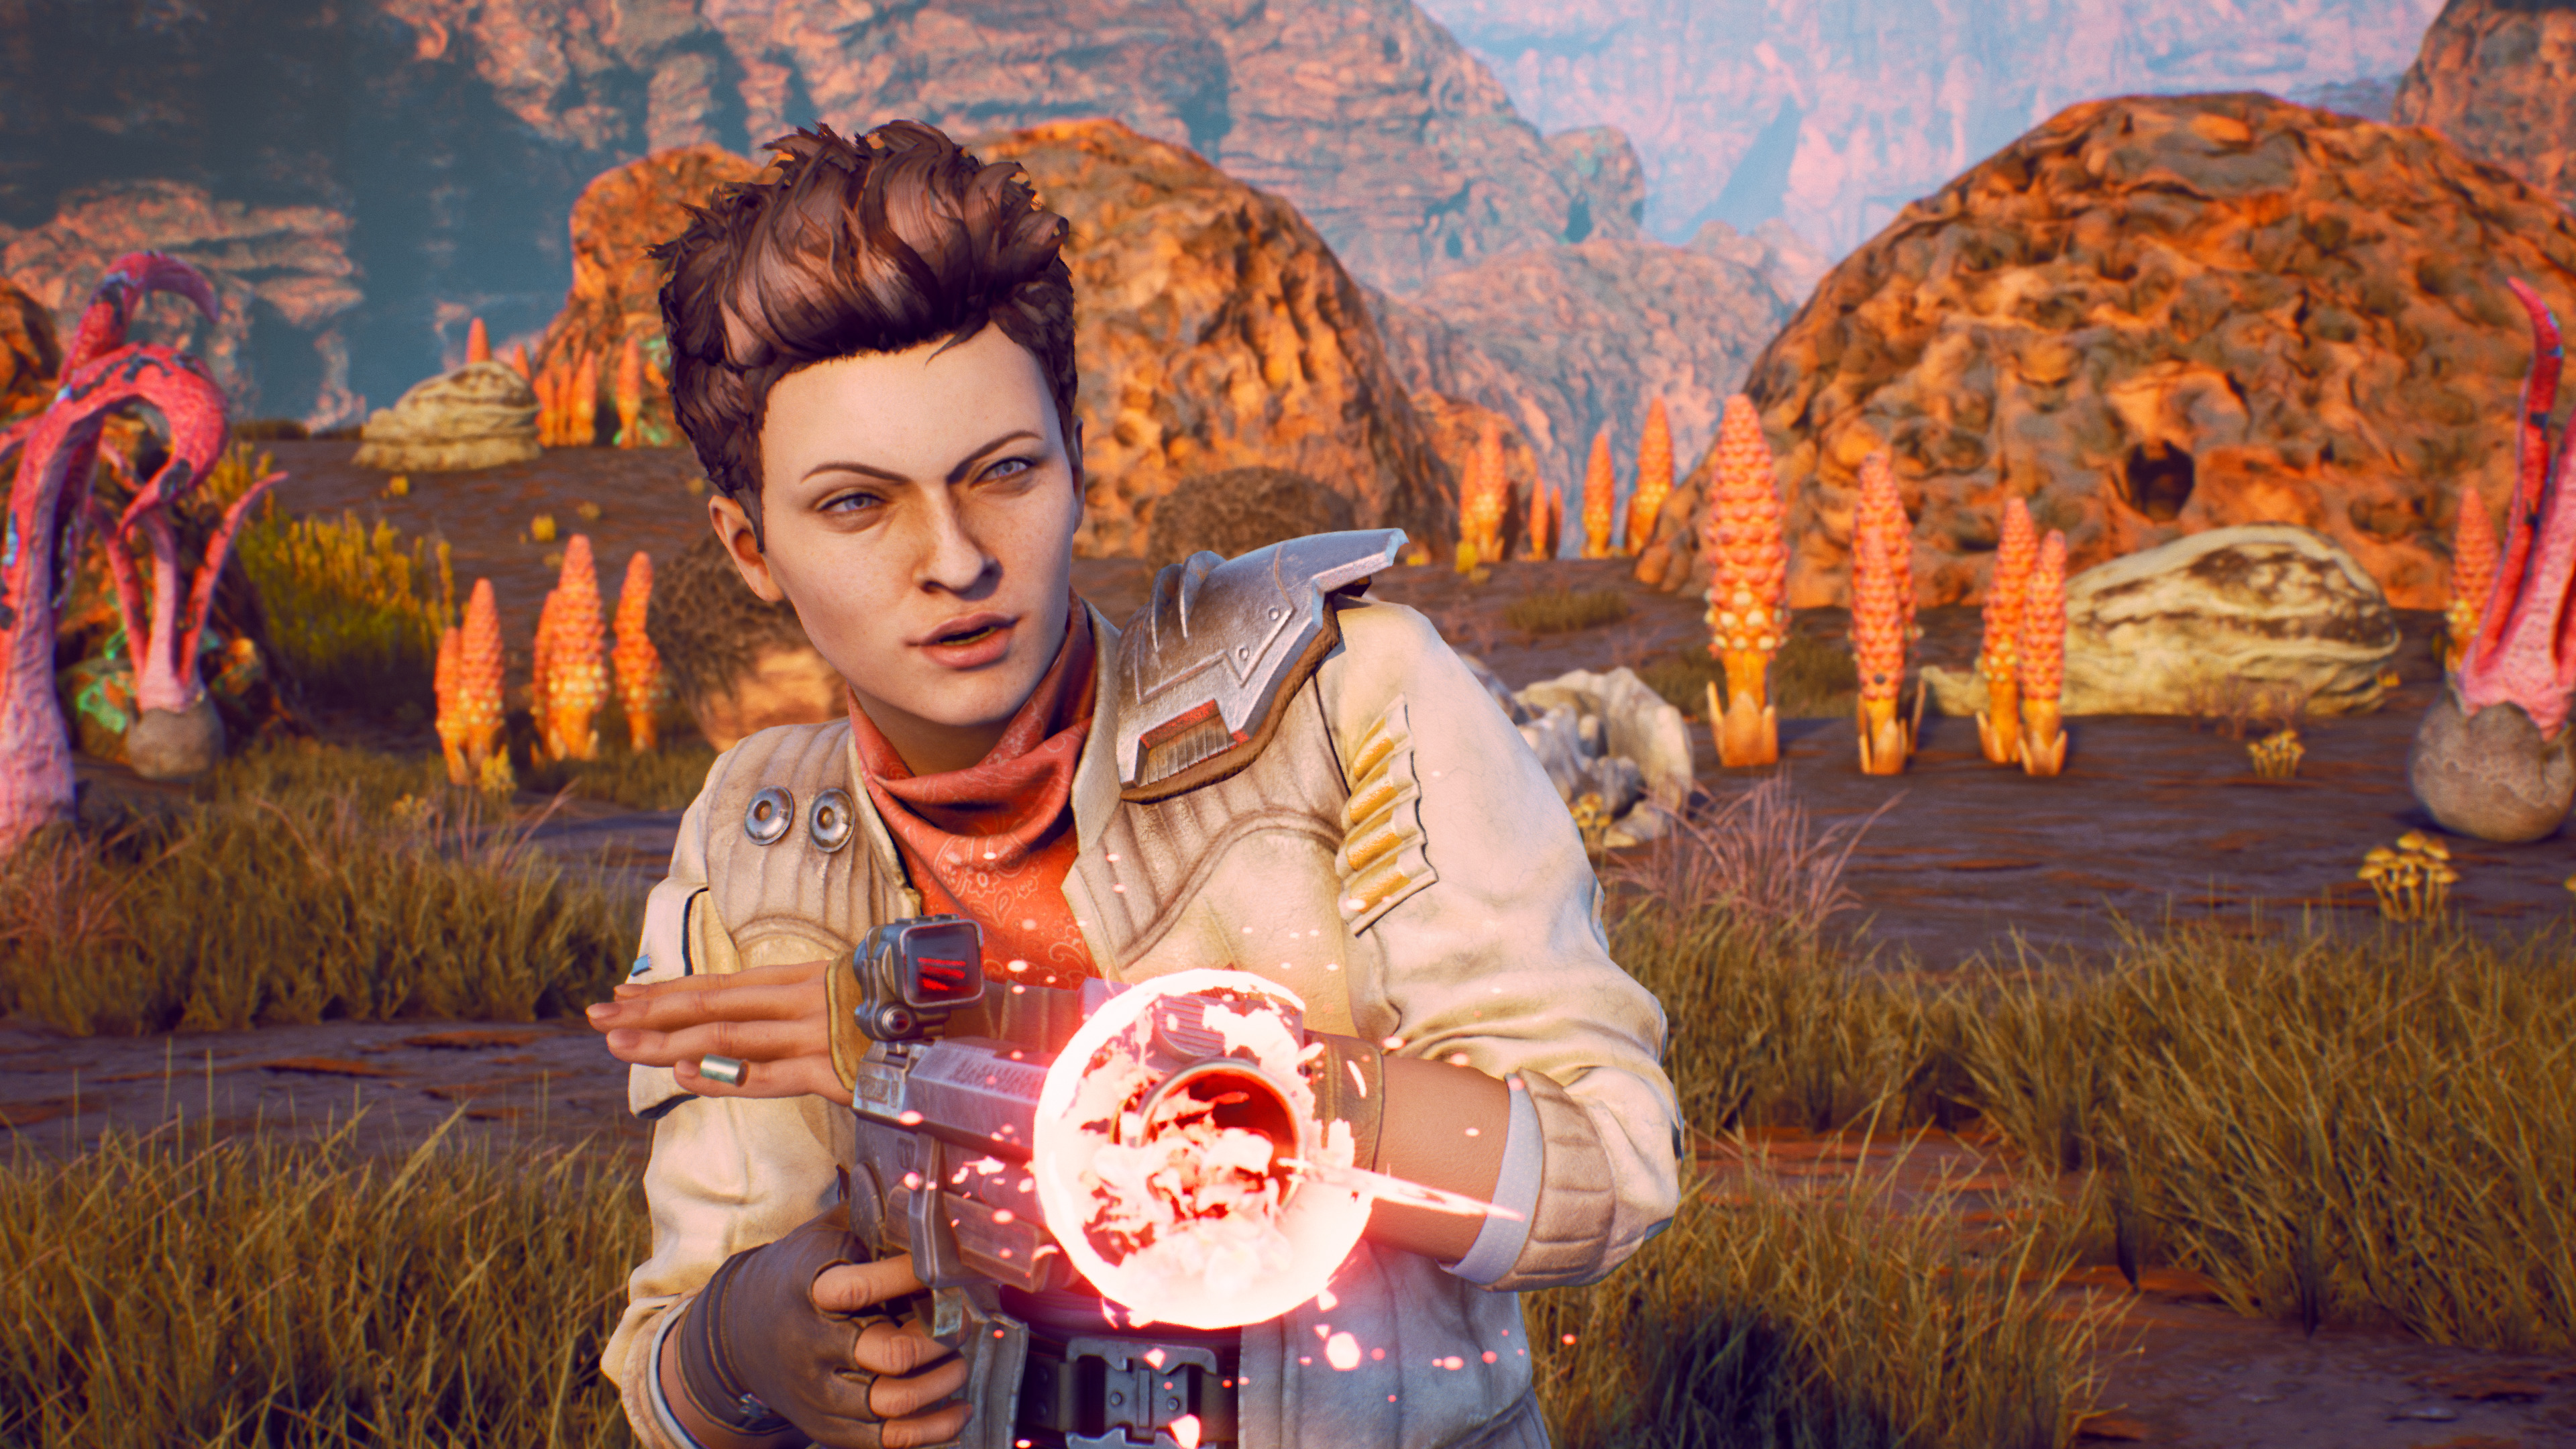 the outer worlds 2 release date